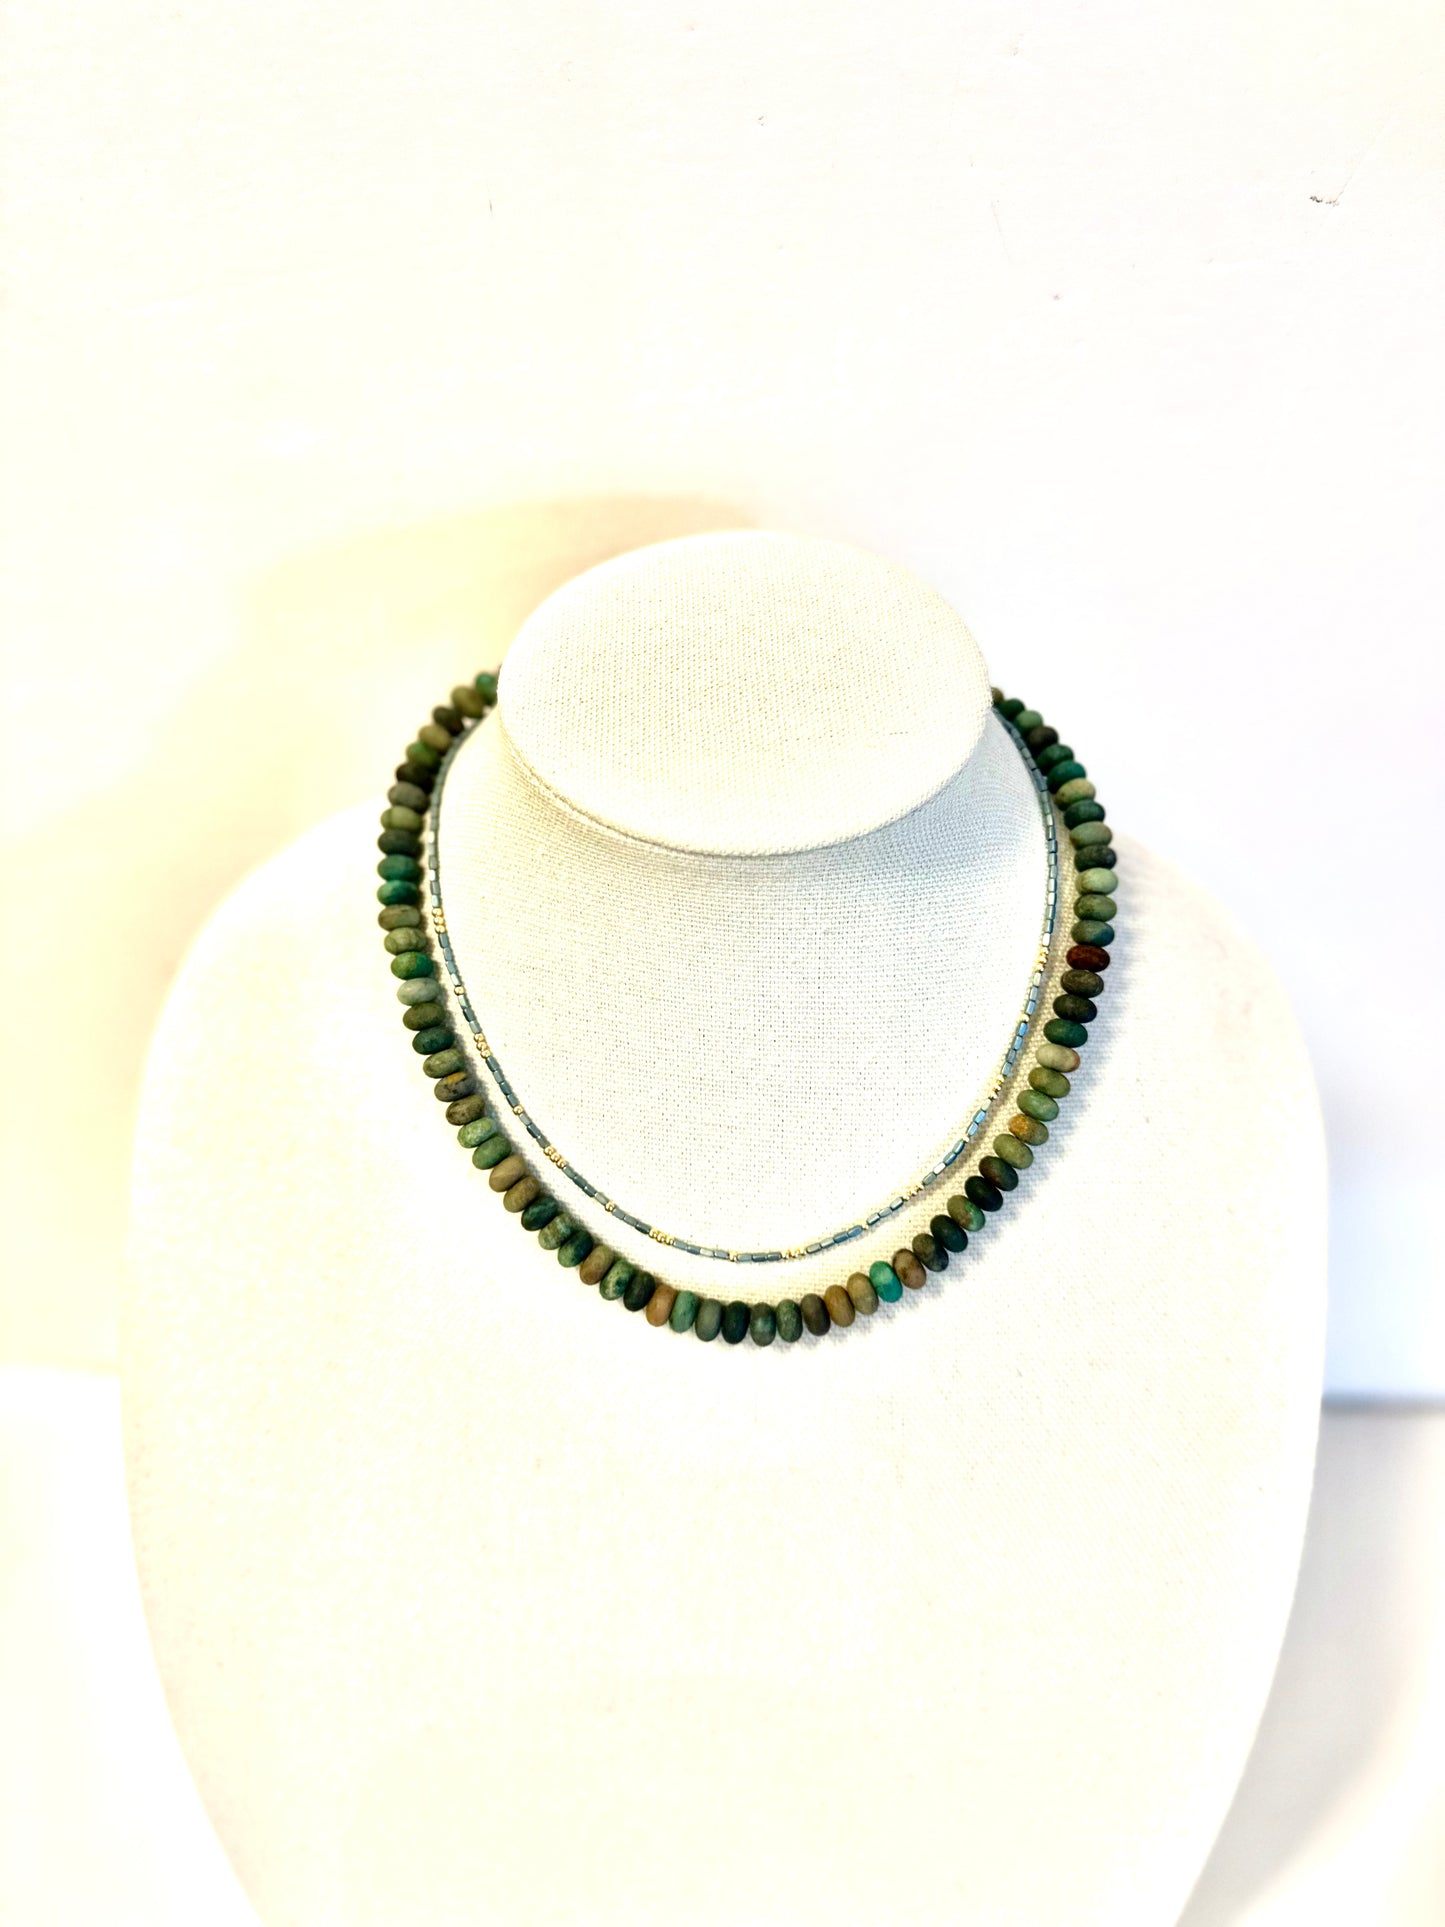 Rondelle 18" Necklace with Small Swivel Clasp in matte green multi by Virtue